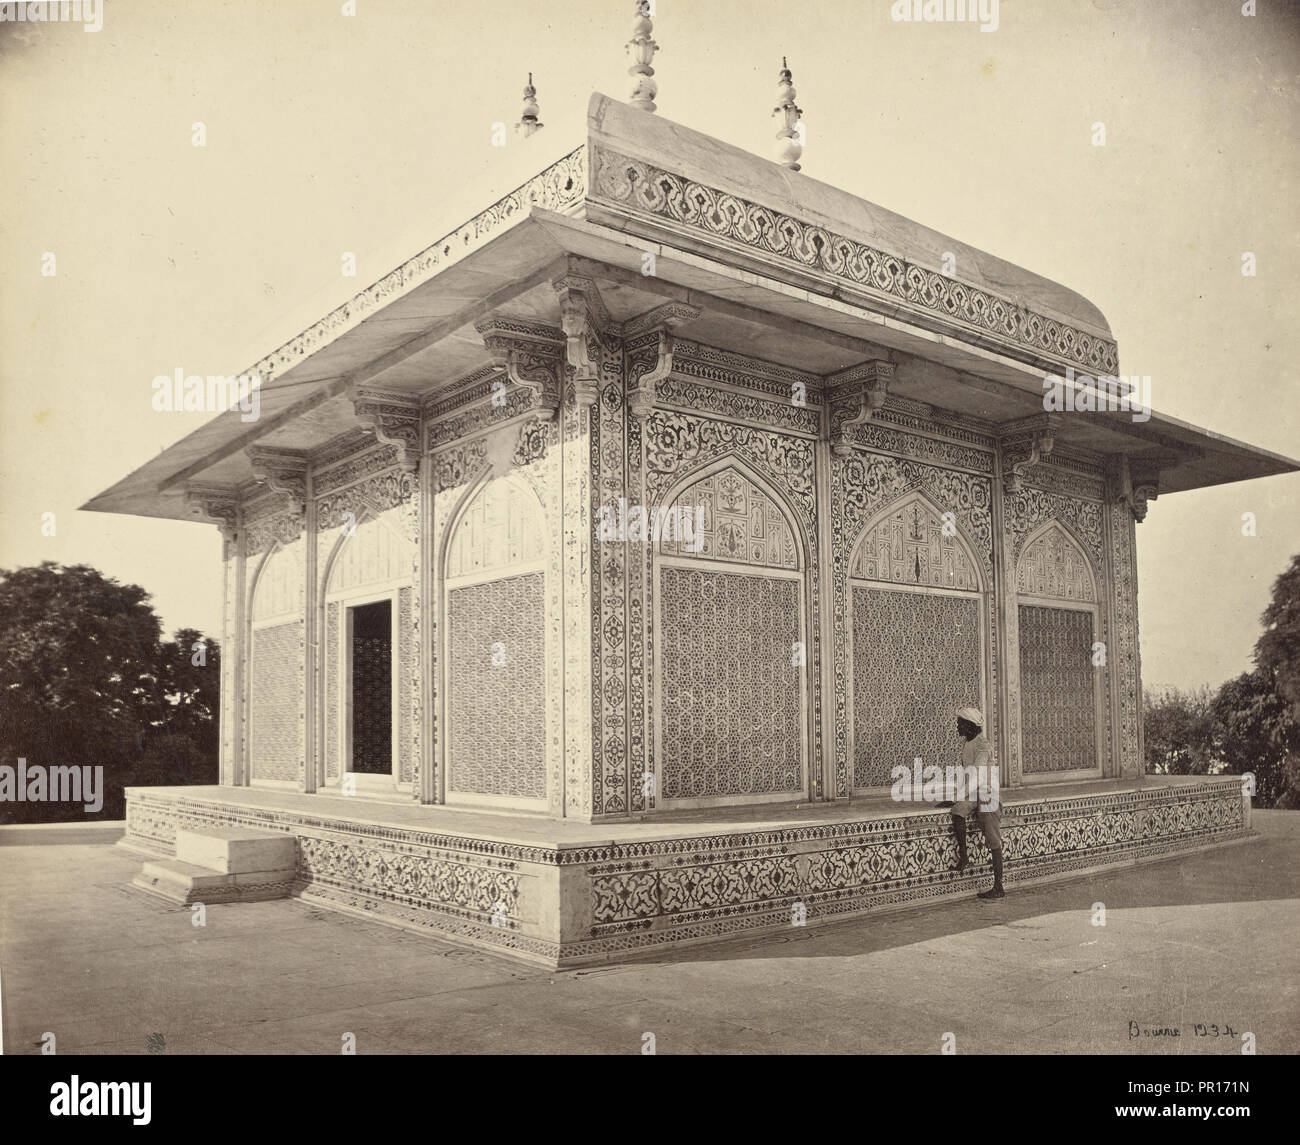 Agra; The Mausoleum of Prince Etmad-Dowlah, the Marble Cupola; Samuel Bourne, English, 1834 - 1912, Agra, India; about 1866 Stock Photo